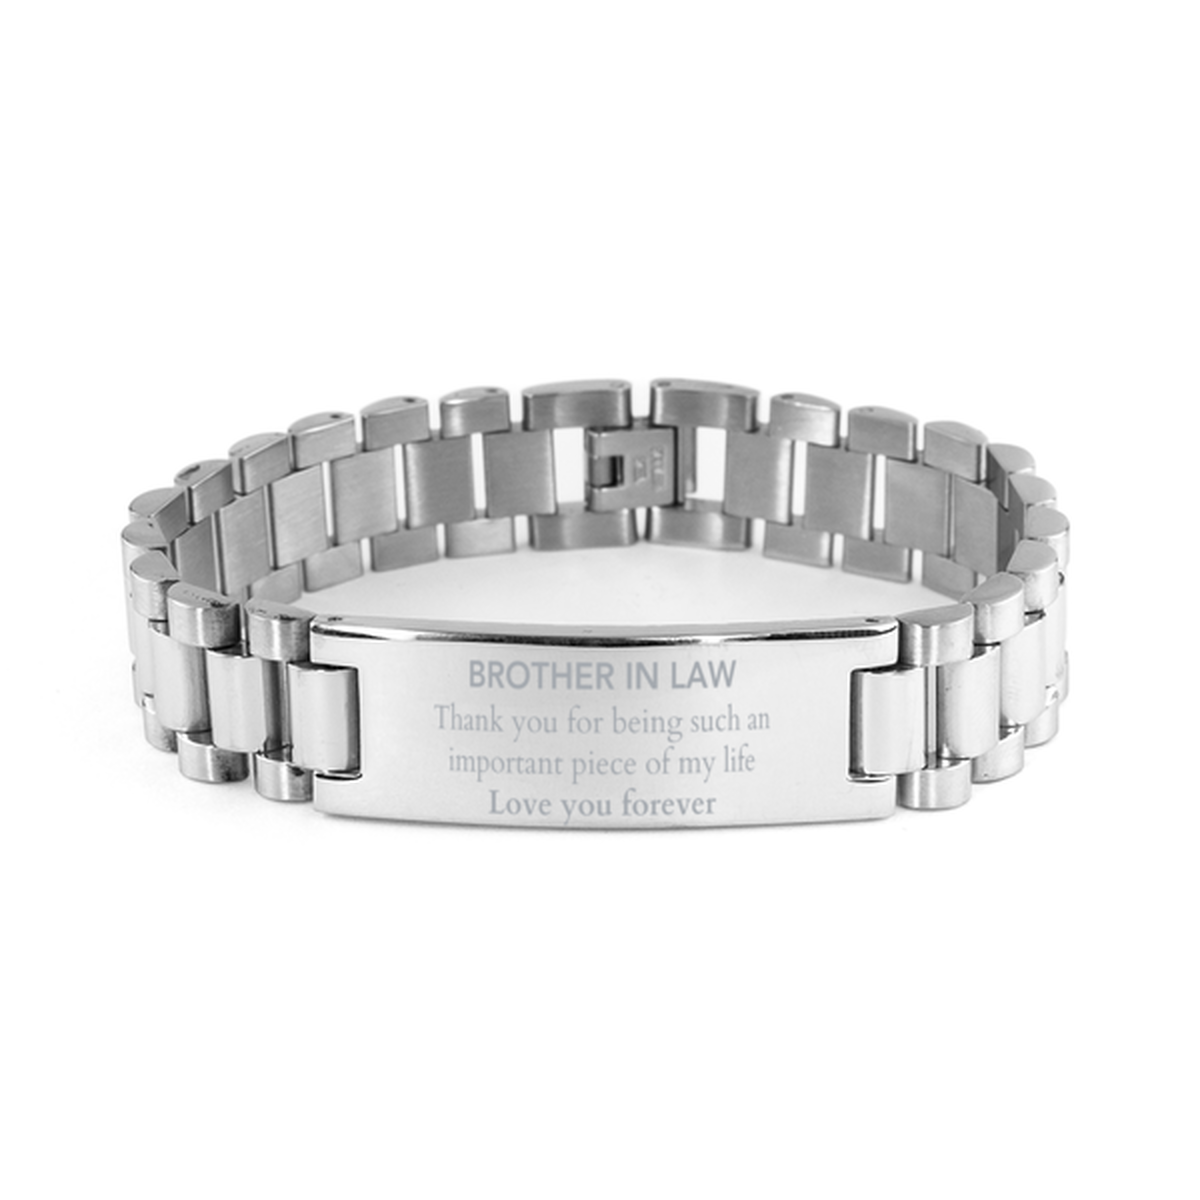 Appropriate Brother In Law Ladder Stainless Steel Bracelet Epic Birthday Gifts for Brother In Law Thank you for being such an important piece of my life Brother In Law Christmas Mothers Fathers Day